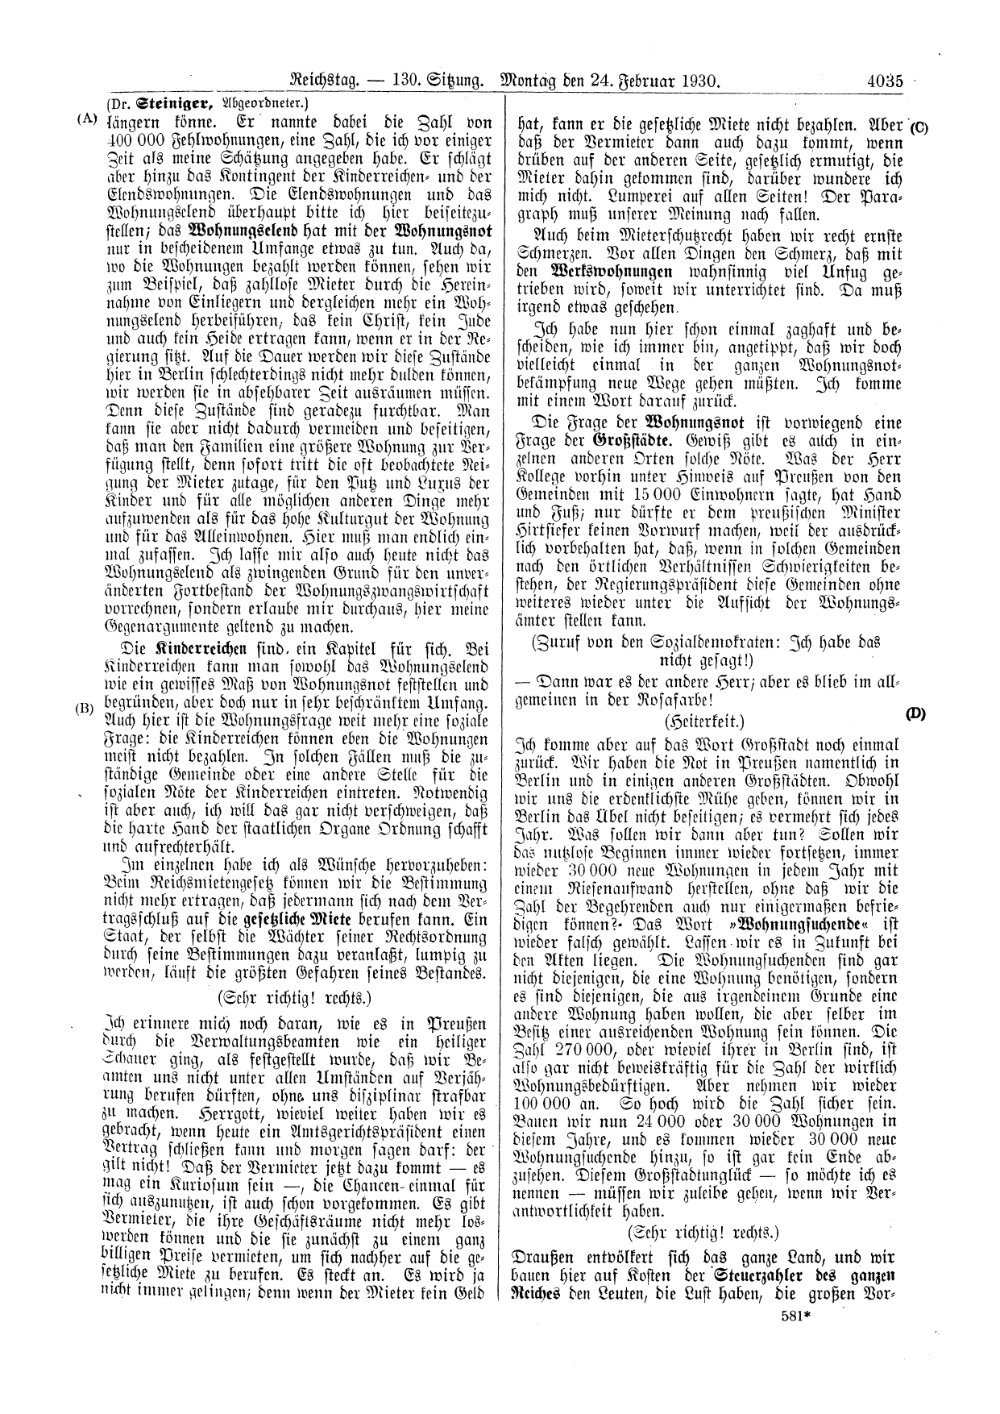 Scan of page 4035